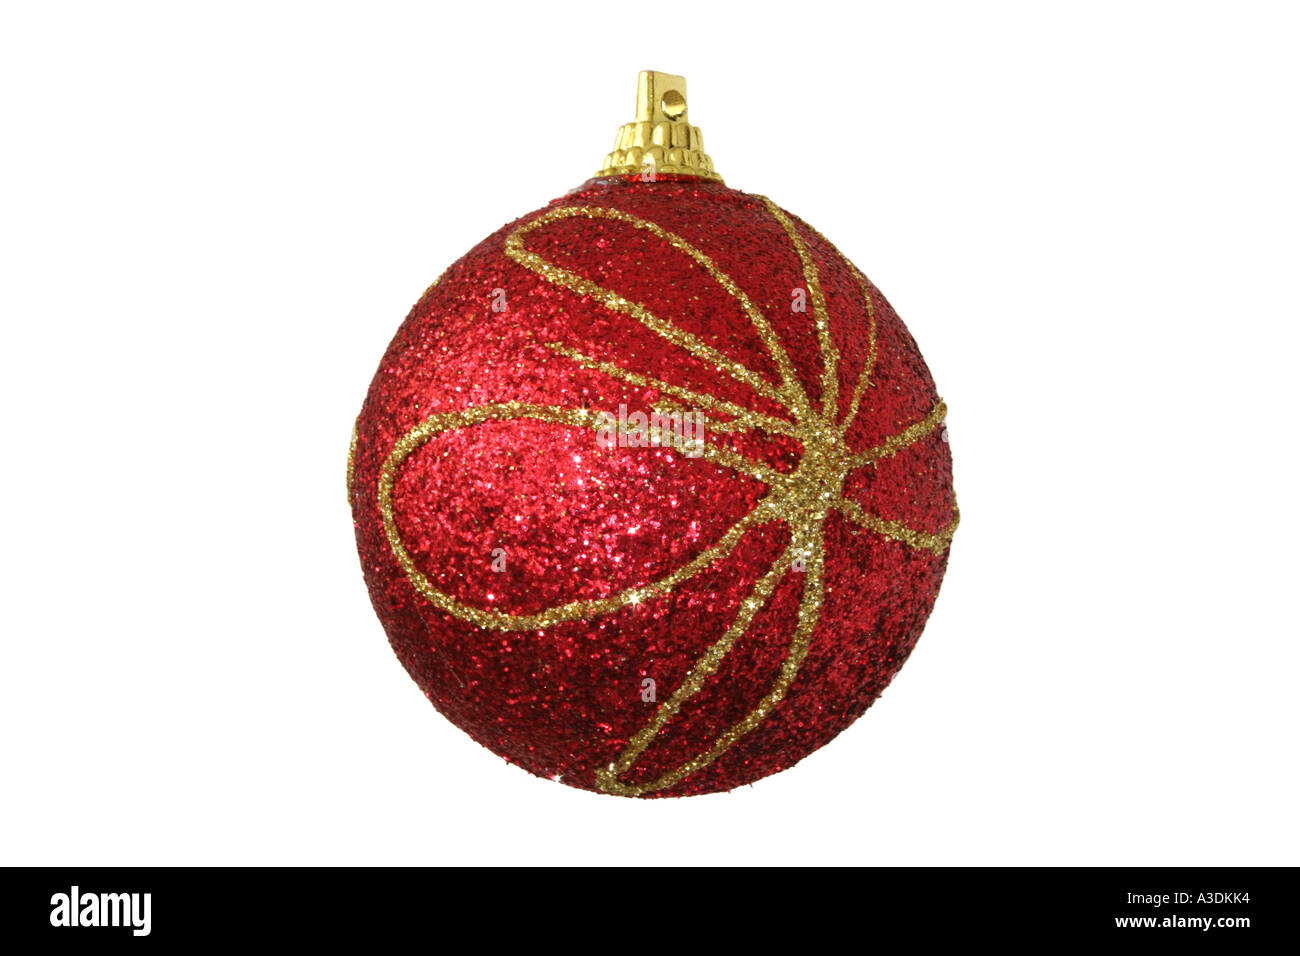 Glittered red christmas ball over a white background. Stock Photo